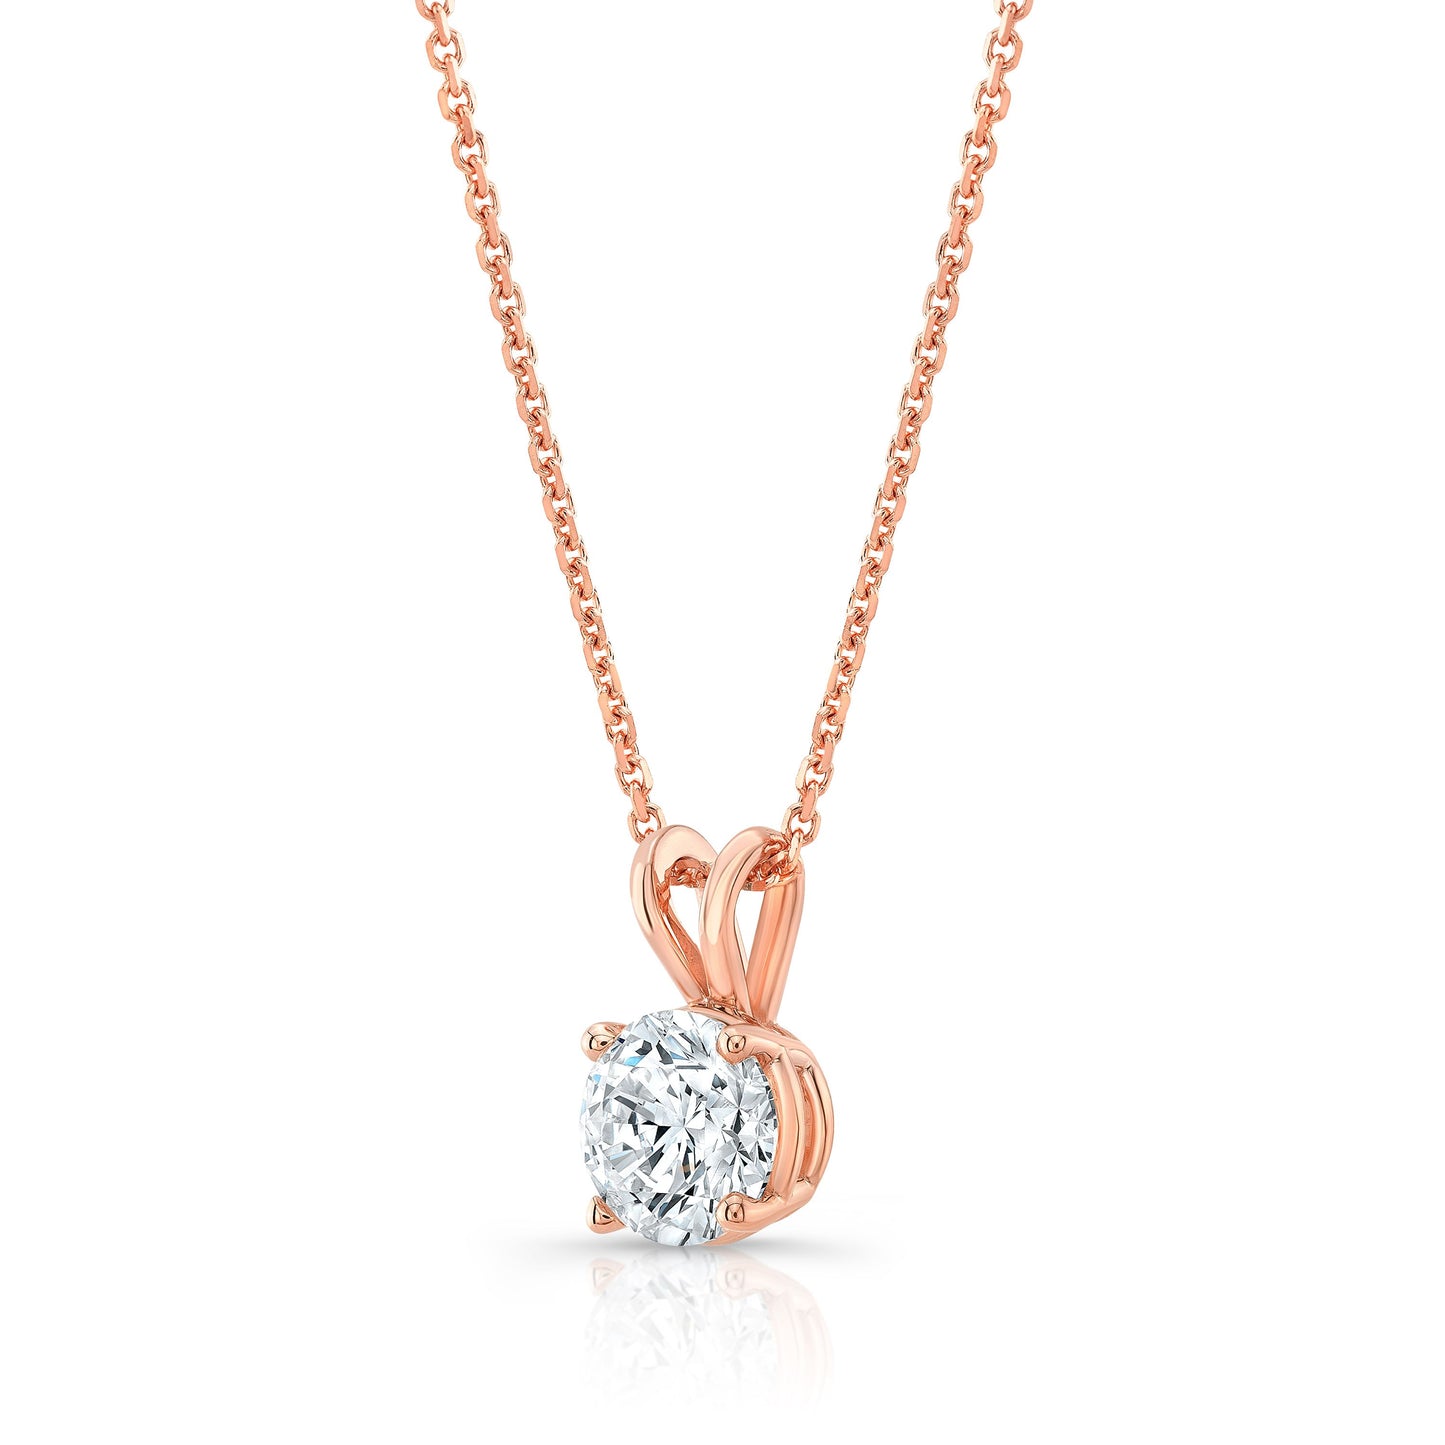 Round (full Cut) Diamond Solitaire Pendant In A 14k Rose Gold 4-prong Basket Setting, 0.55ct. T.w. (hi, Si1-si2)